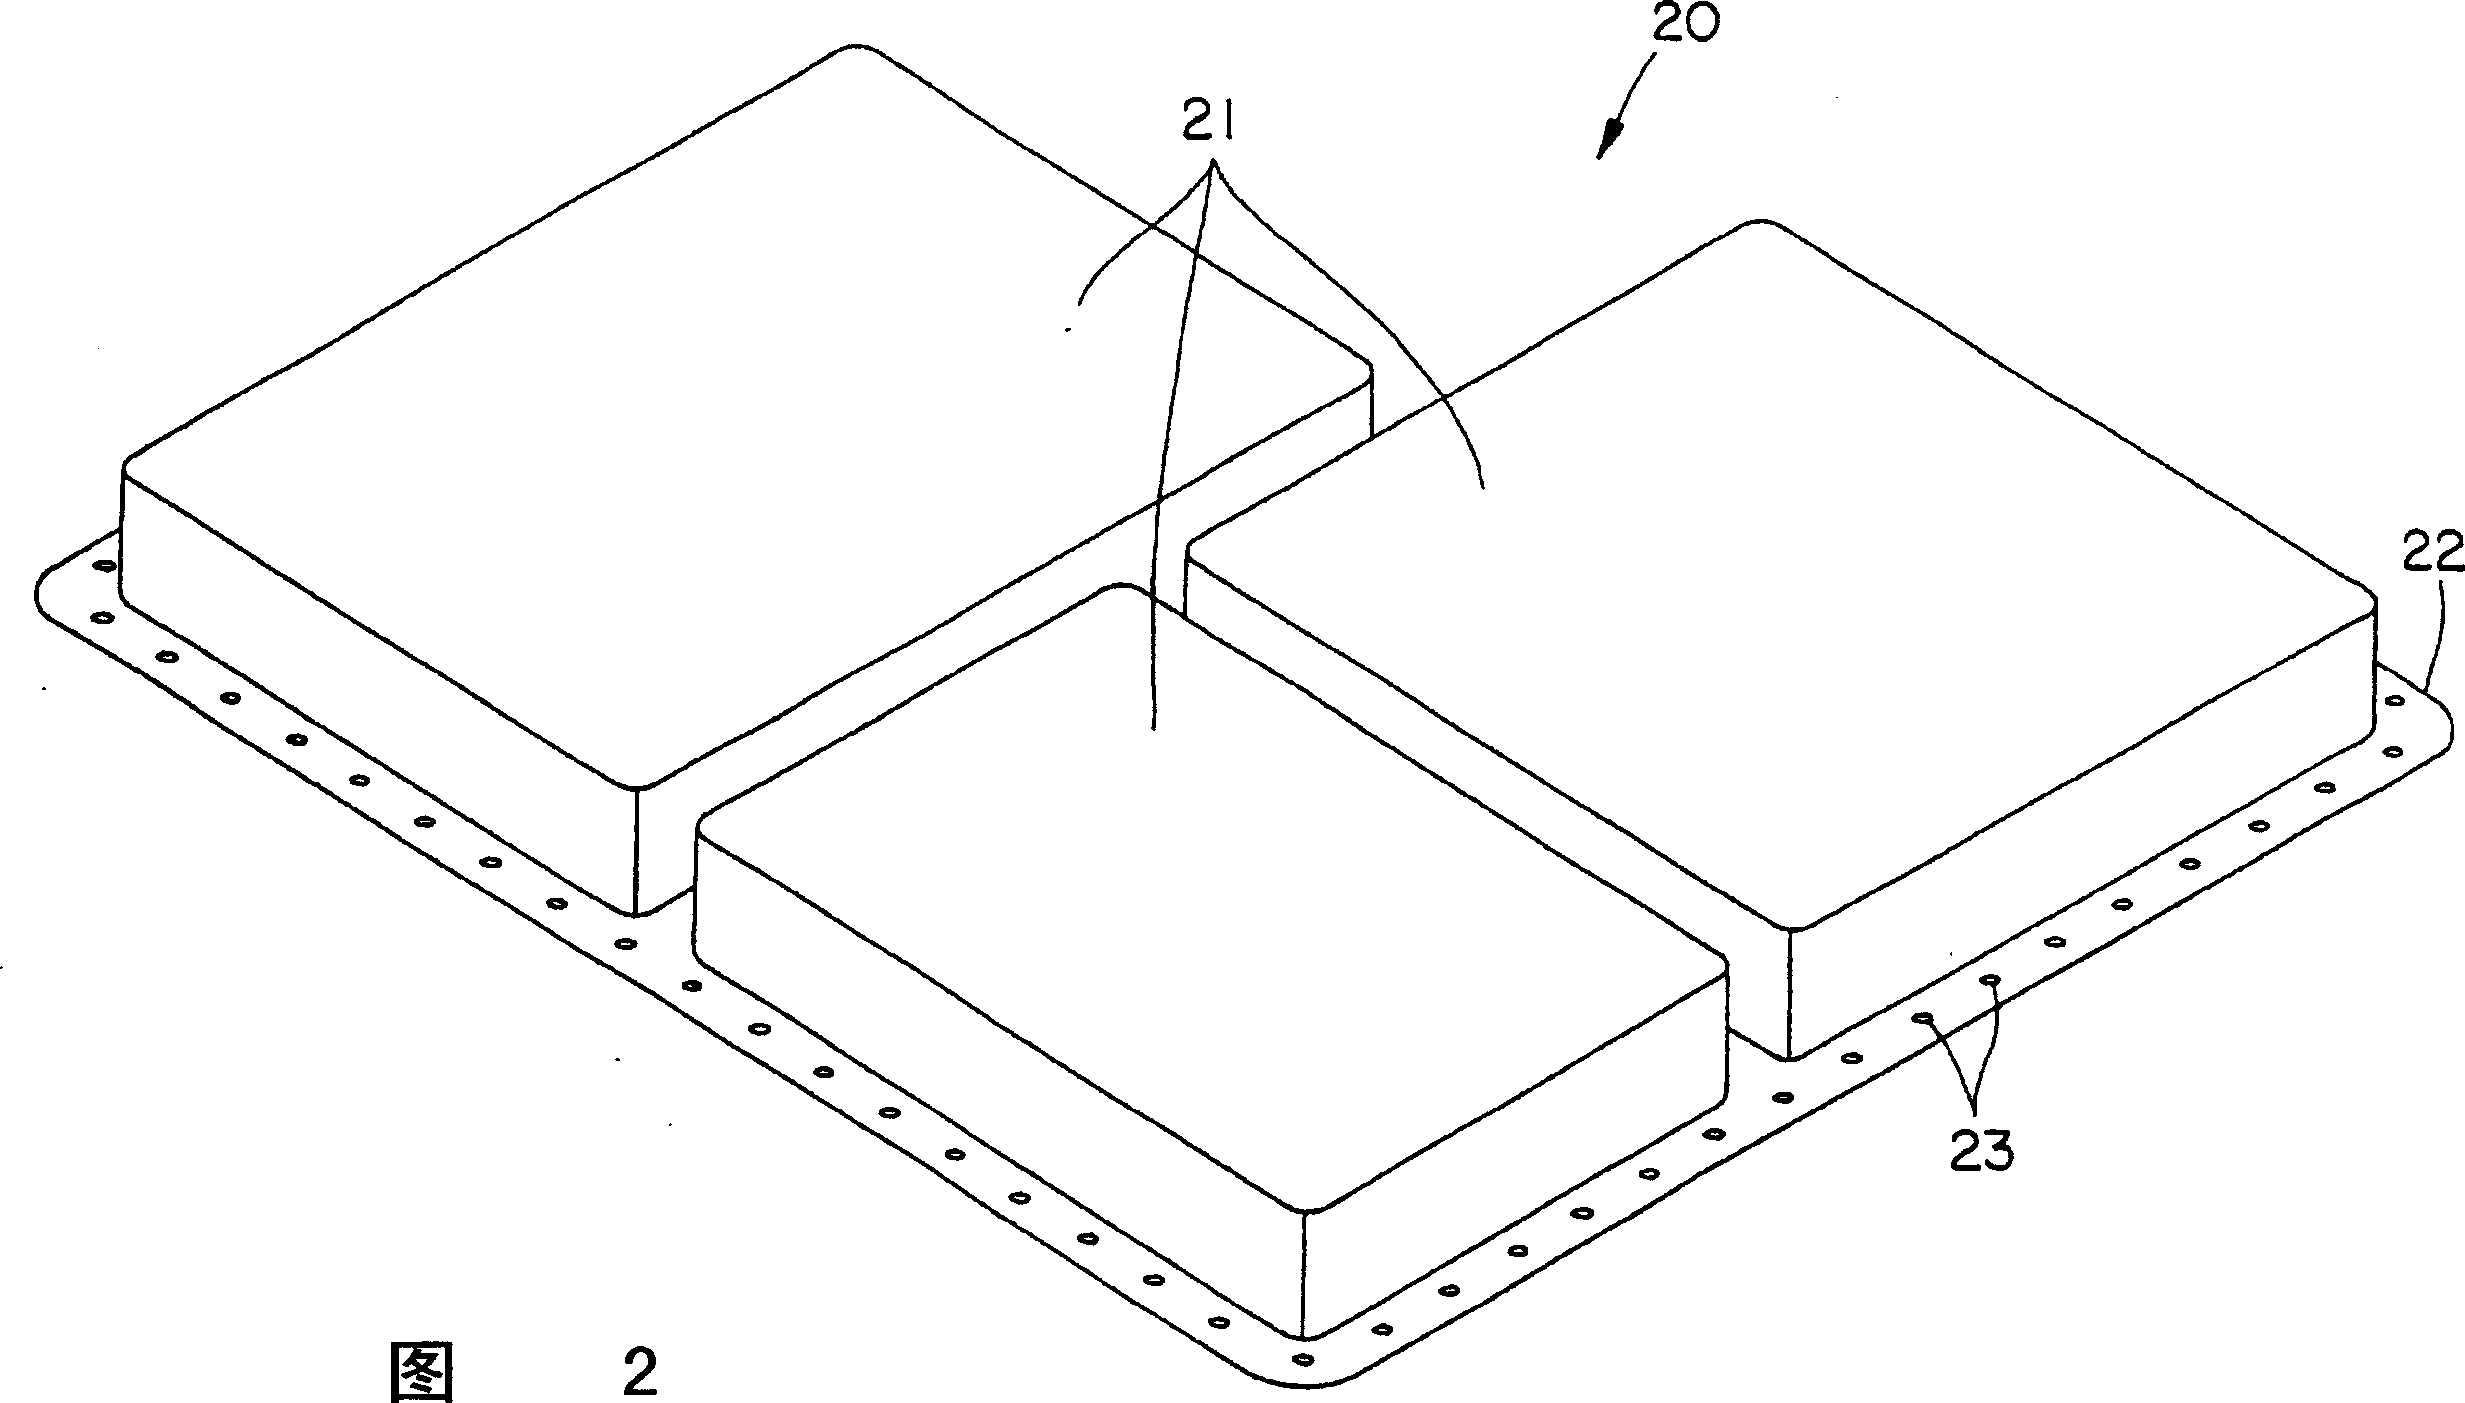 Board-level EMI shield with enhanced thermal dissipation